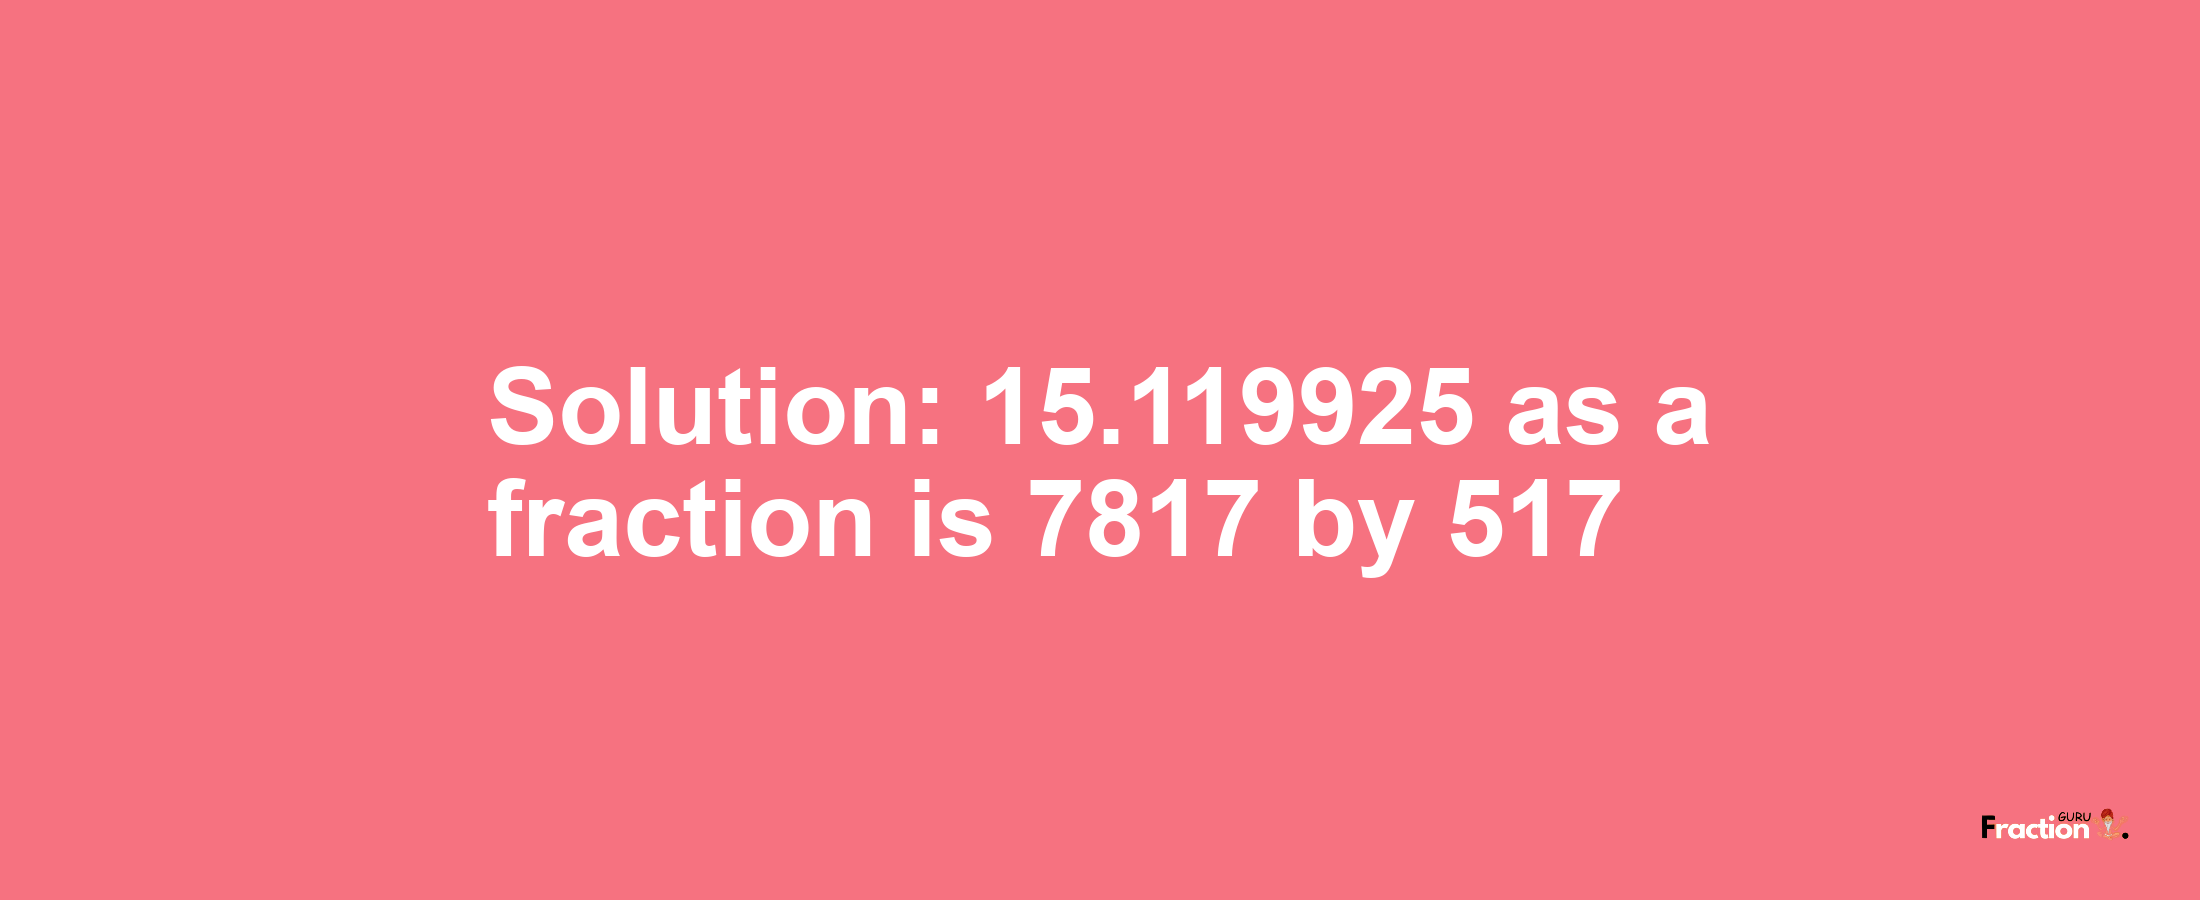 Solution:15.119925 as a fraction is 7817/517